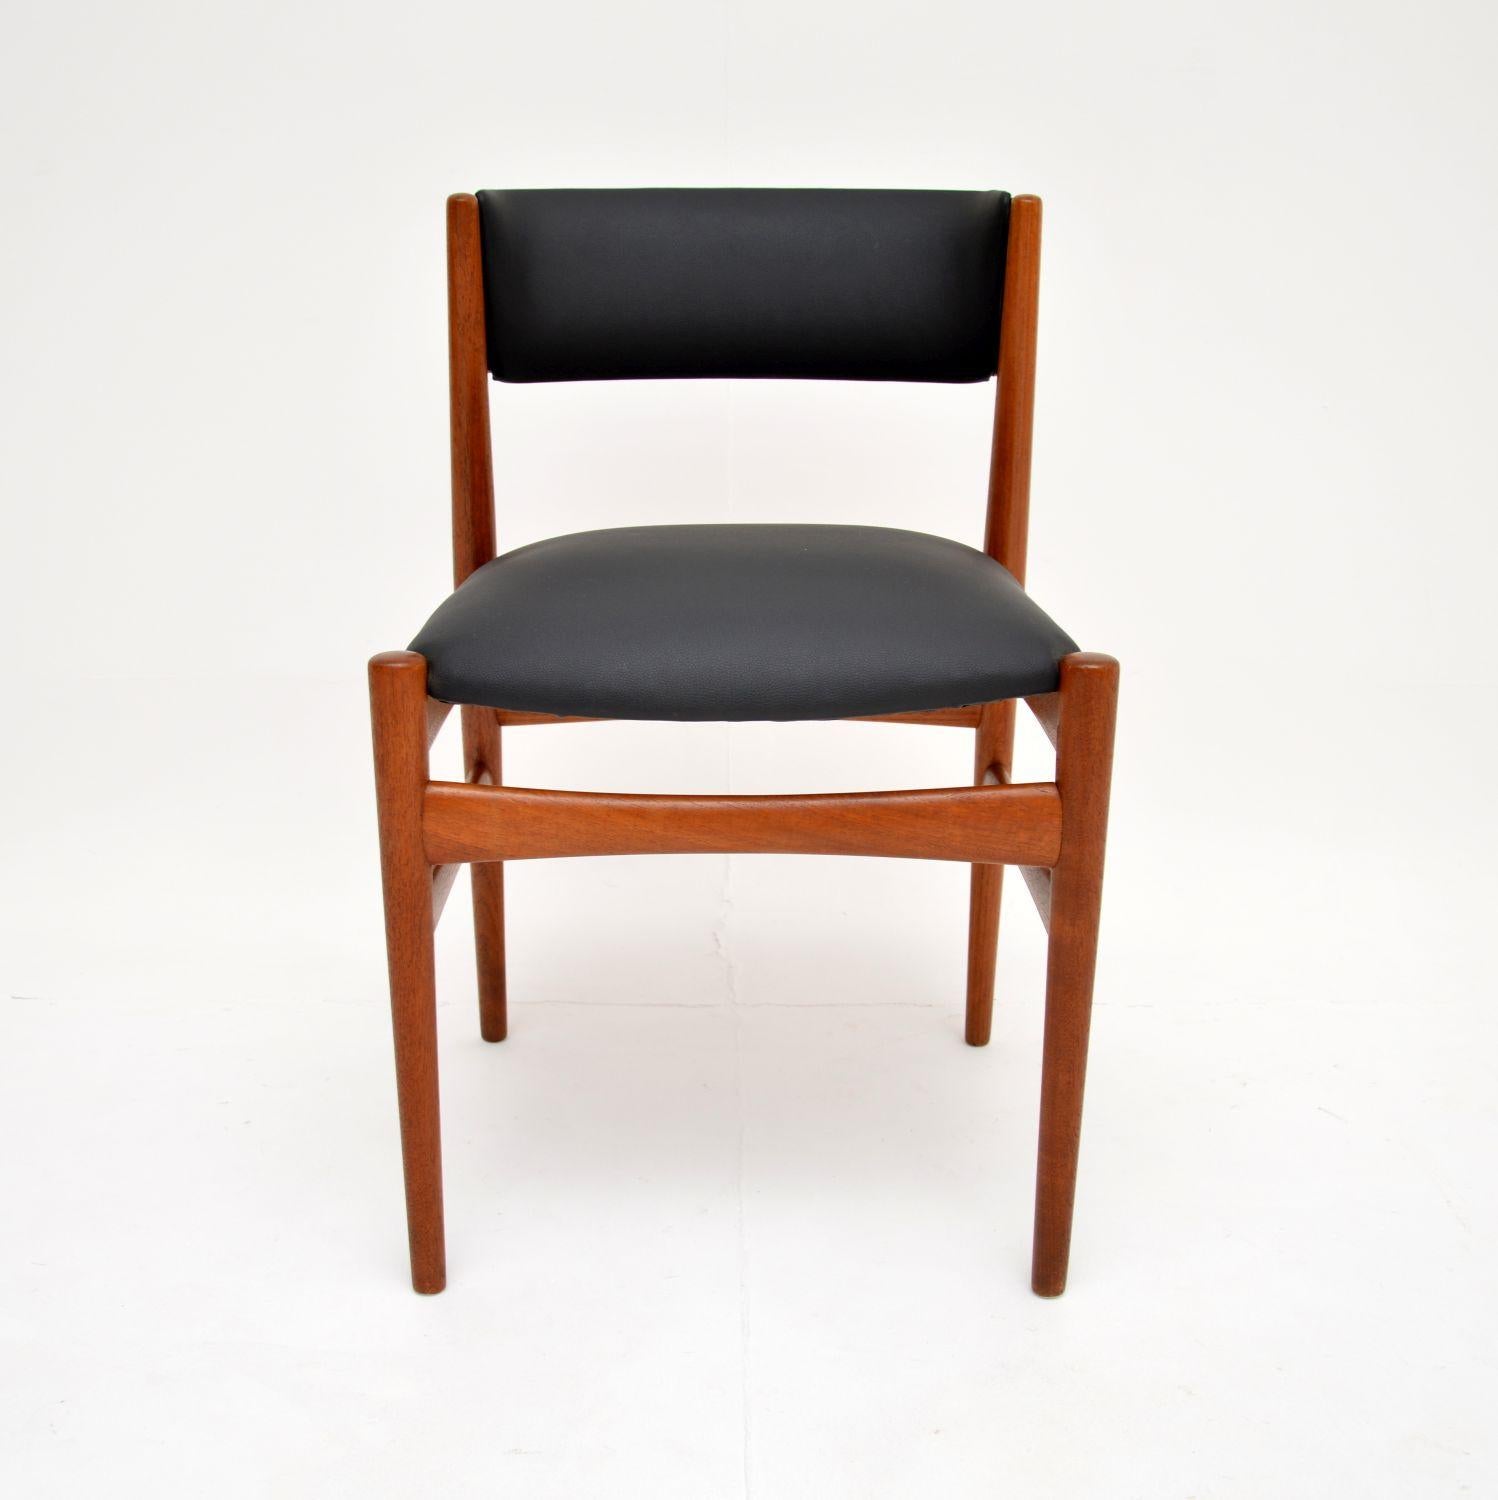 A beautifully designed vintage Danish chair in solid teak, this was made in the 1960’s.

It is of super quality and is very comfortable, as well as very stylish. This is perfect for use as an accent chair, desk chair or additional dining chair.

We